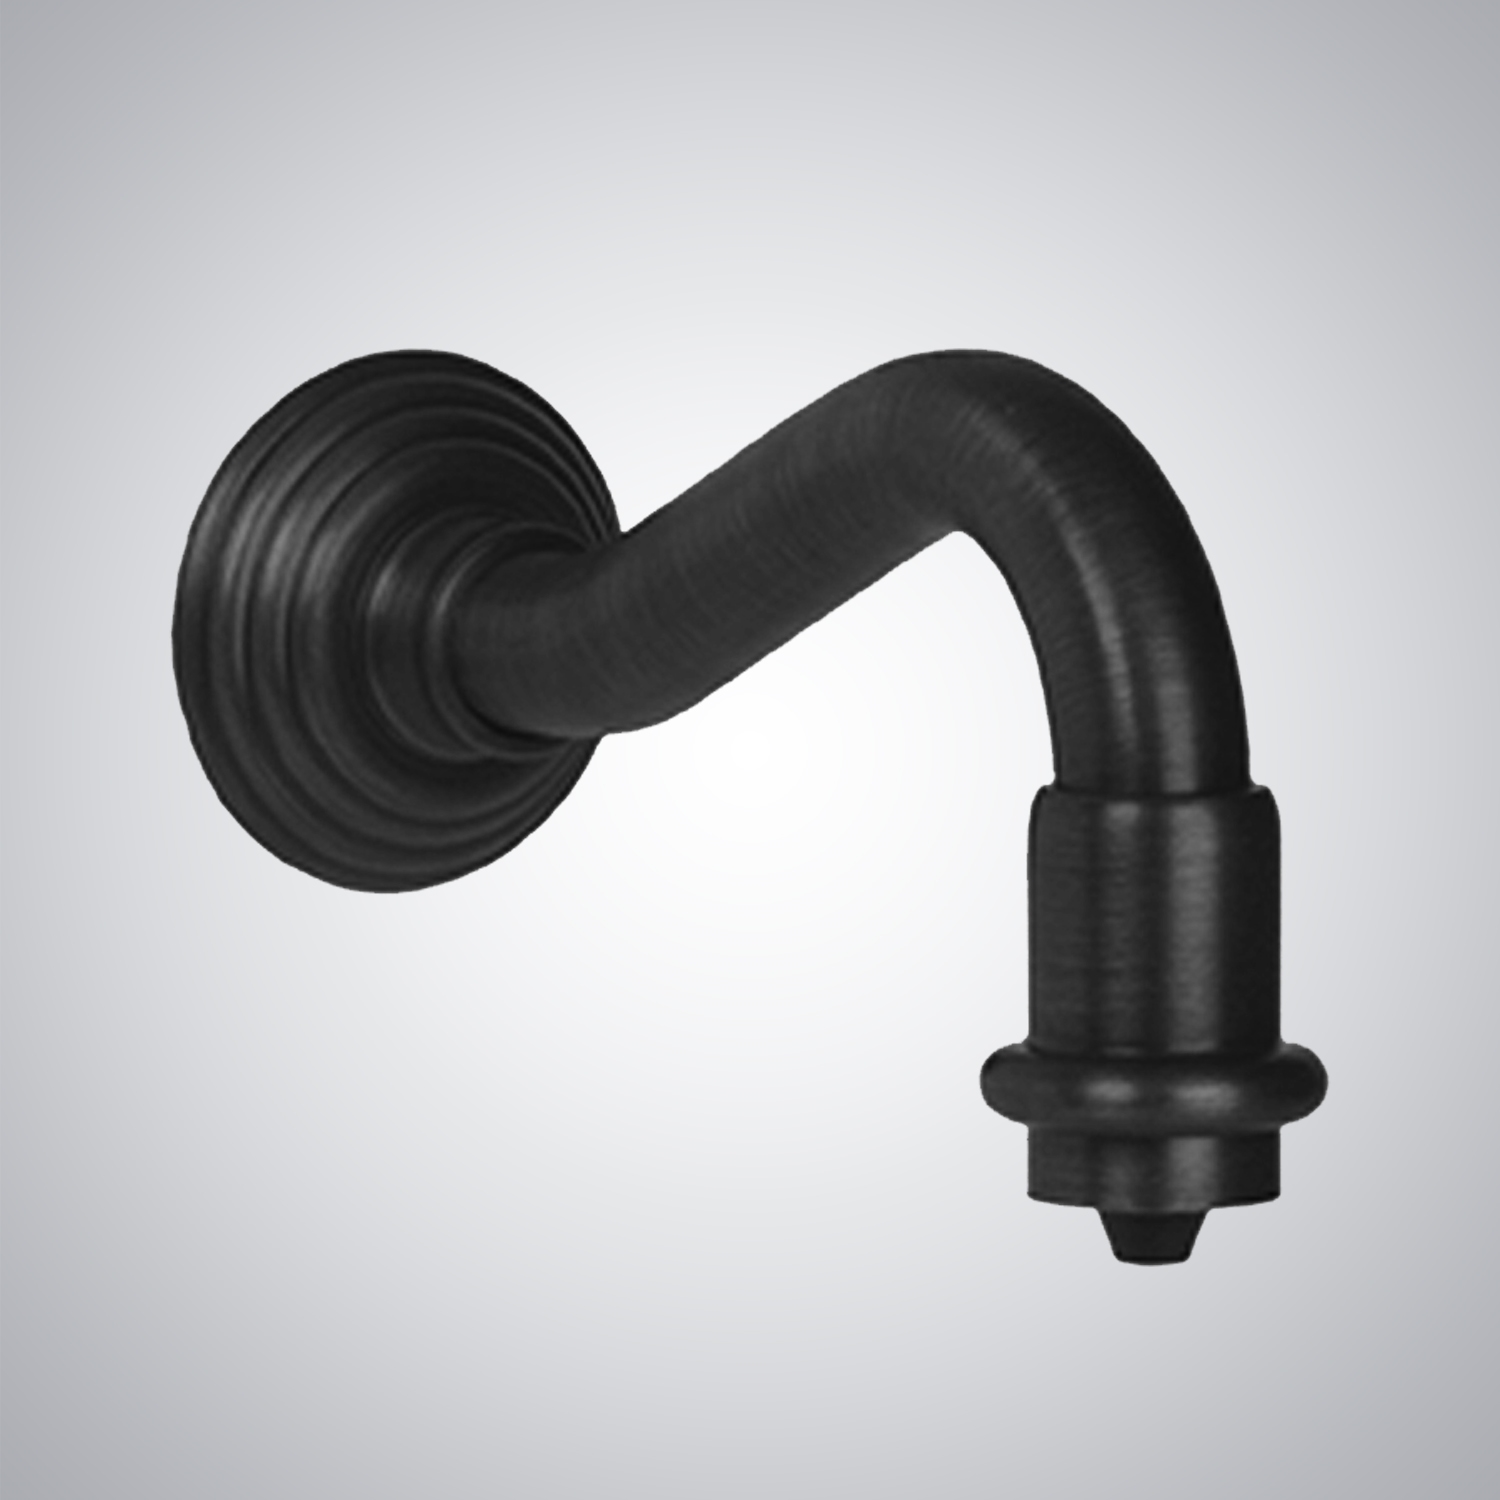 Wall Mounted Oil Rubbed Bronze Soap Dispenser